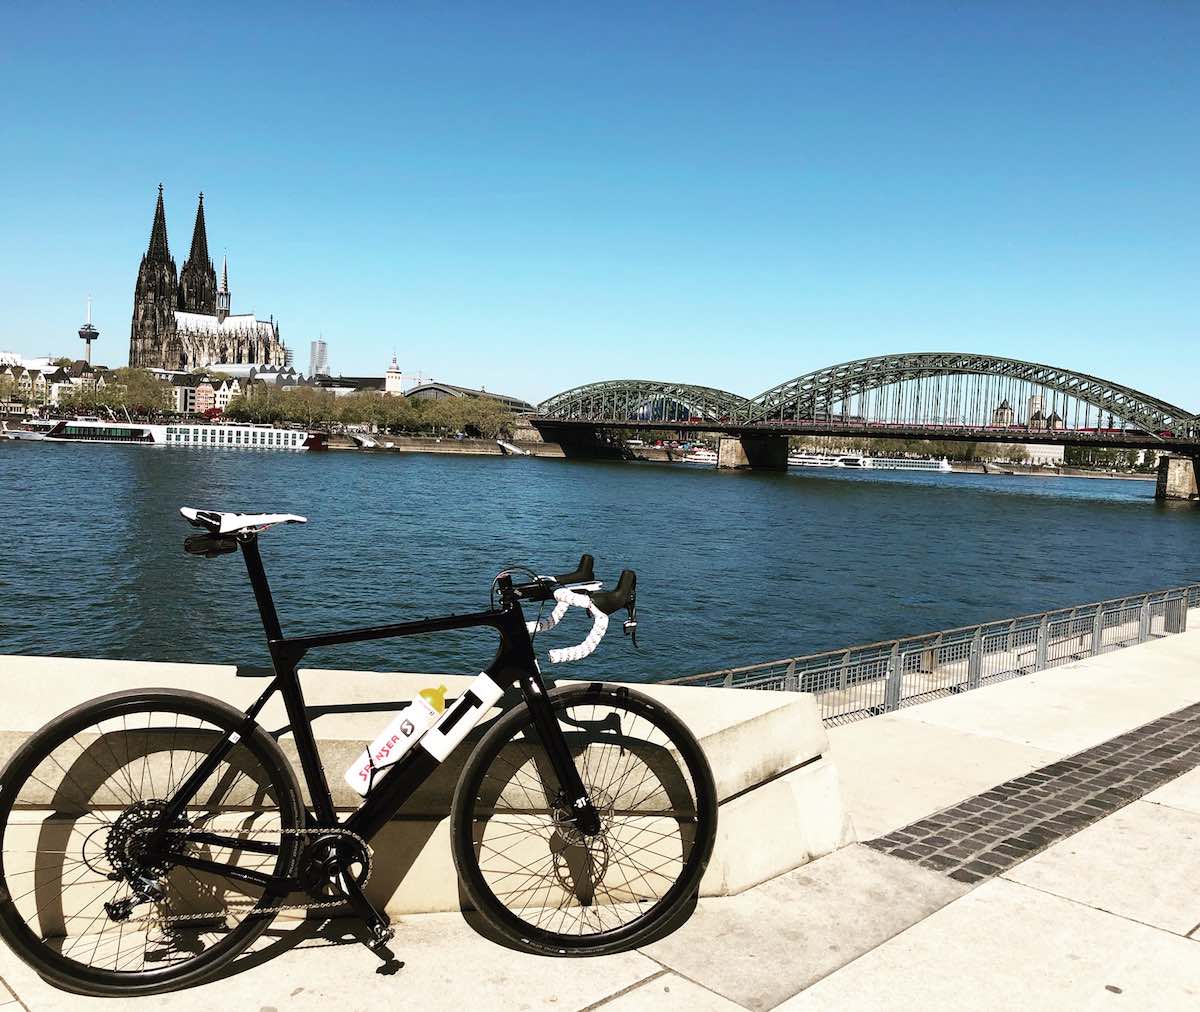 bikerumor pic of the day 3T Exploro bike in front of Cologne Cathedral in Germany.